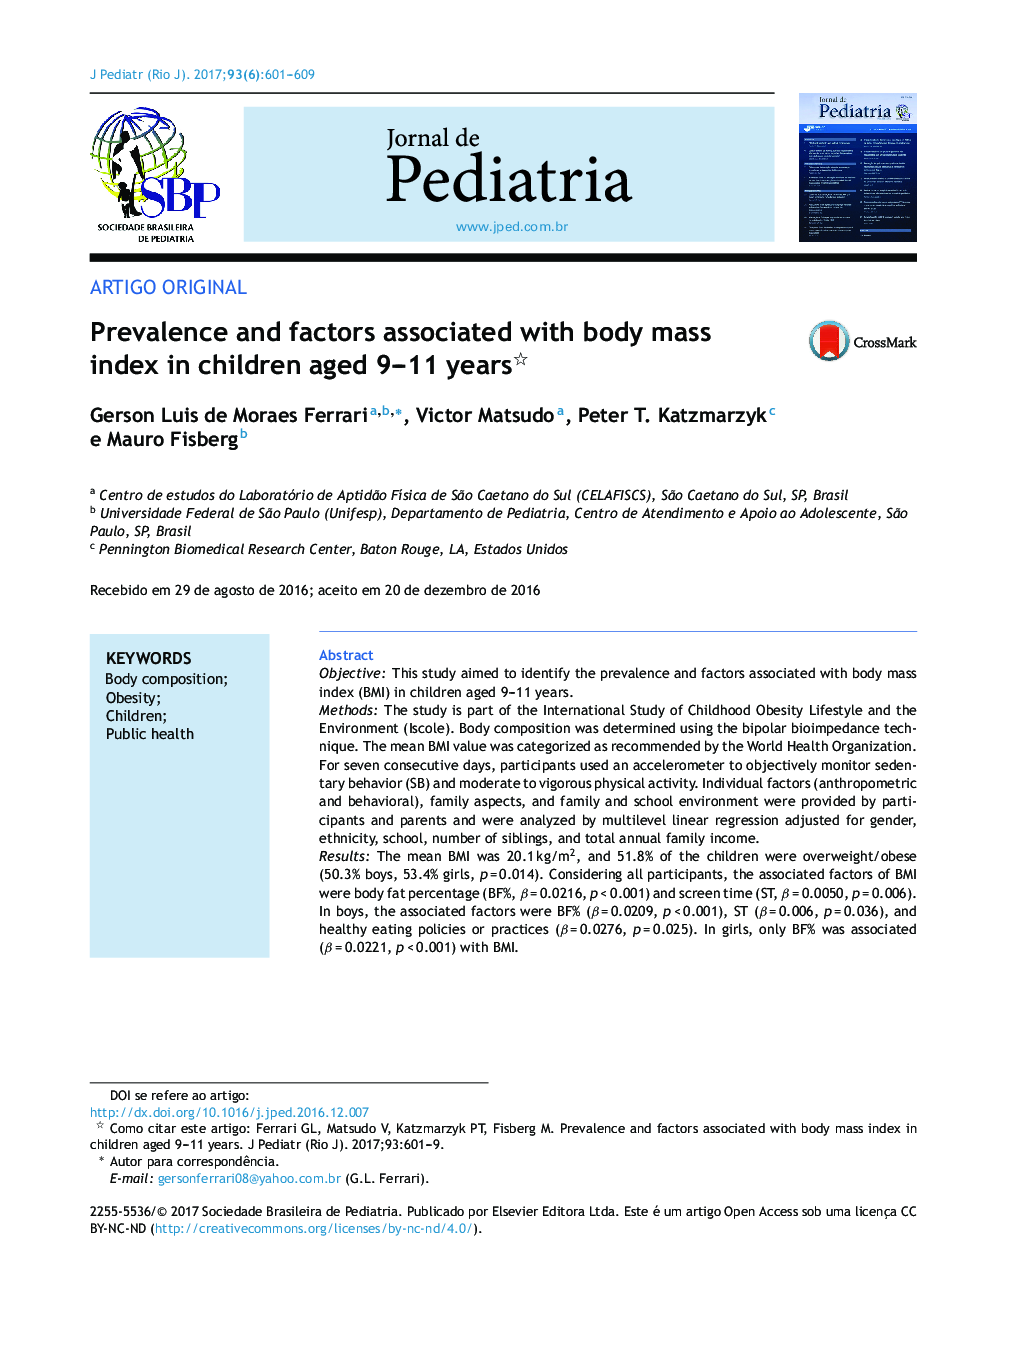 Prevalence and factors associated with body mass index in children aged 9-11 years